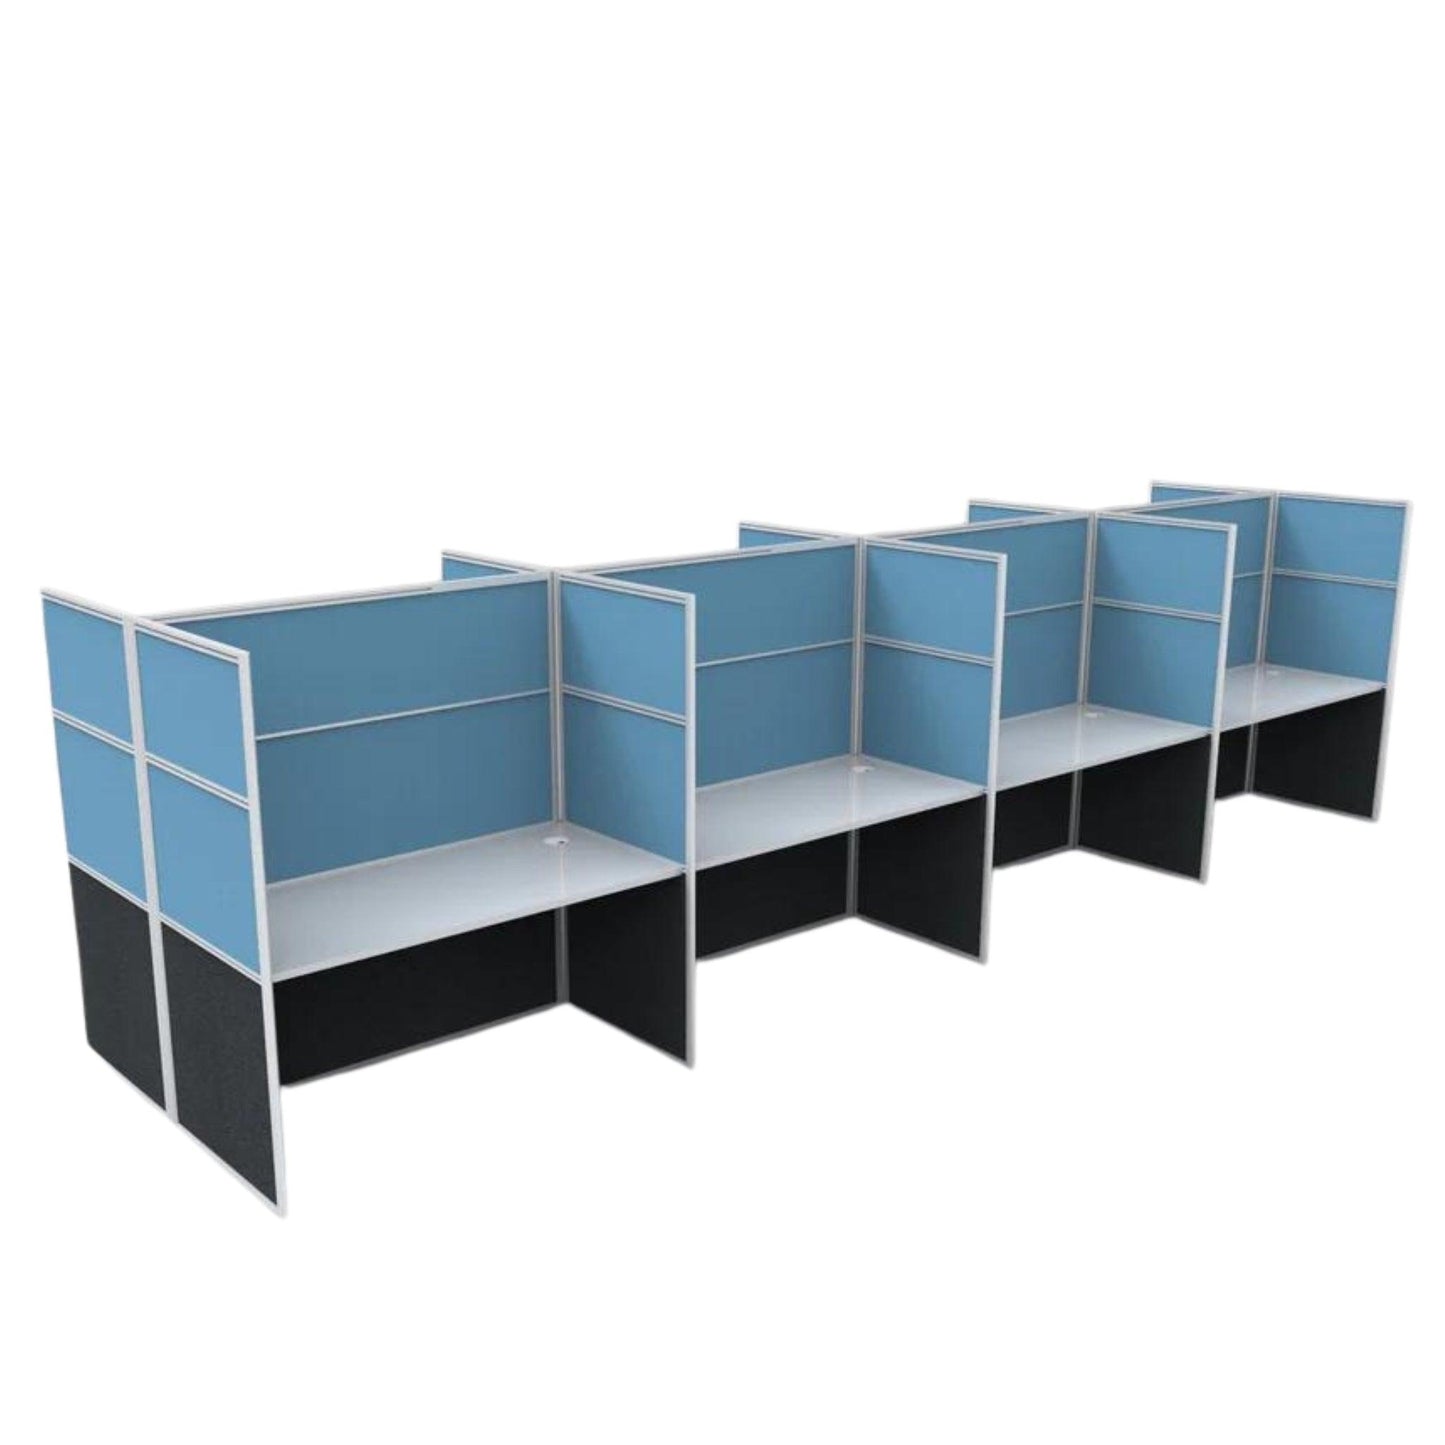 Rapid Screen 8 Person Workstation - Office Furniture Company 